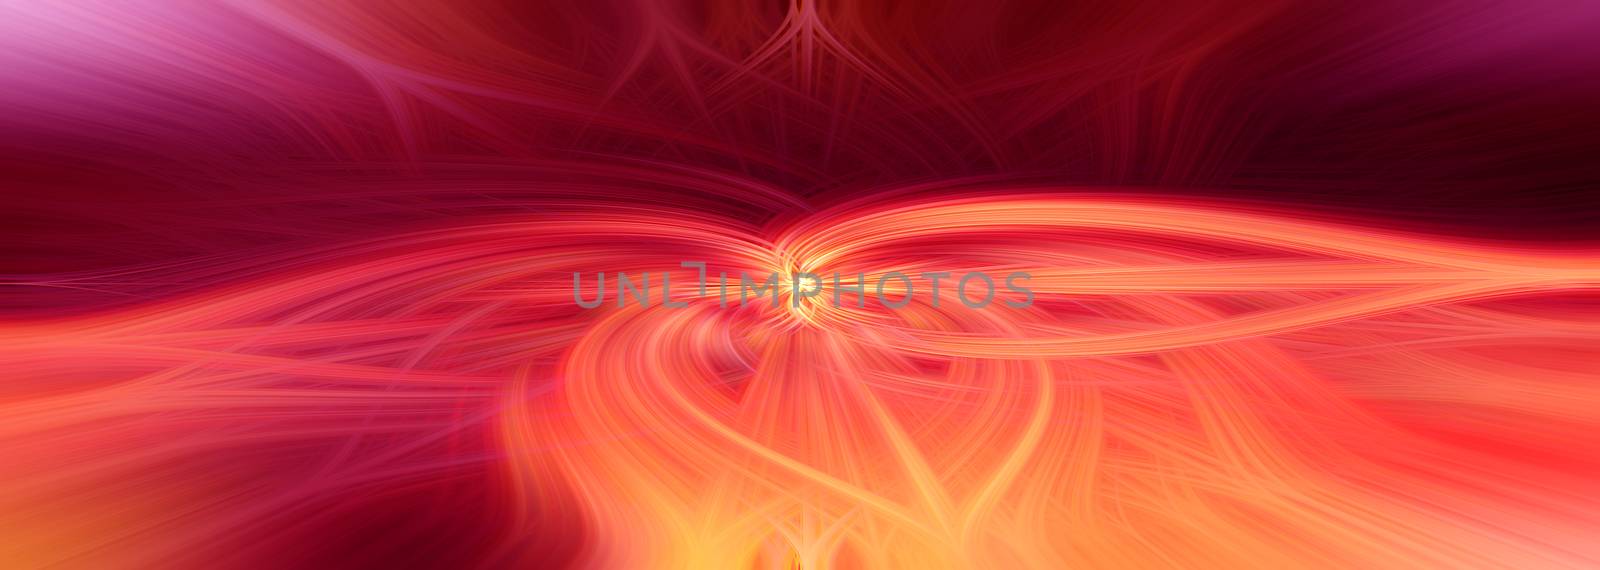 Beautiful abstract intertwined 3d fibers forming an ornament made of various shapes. Red, orange, and purple colors. Illustration. Panorama size.